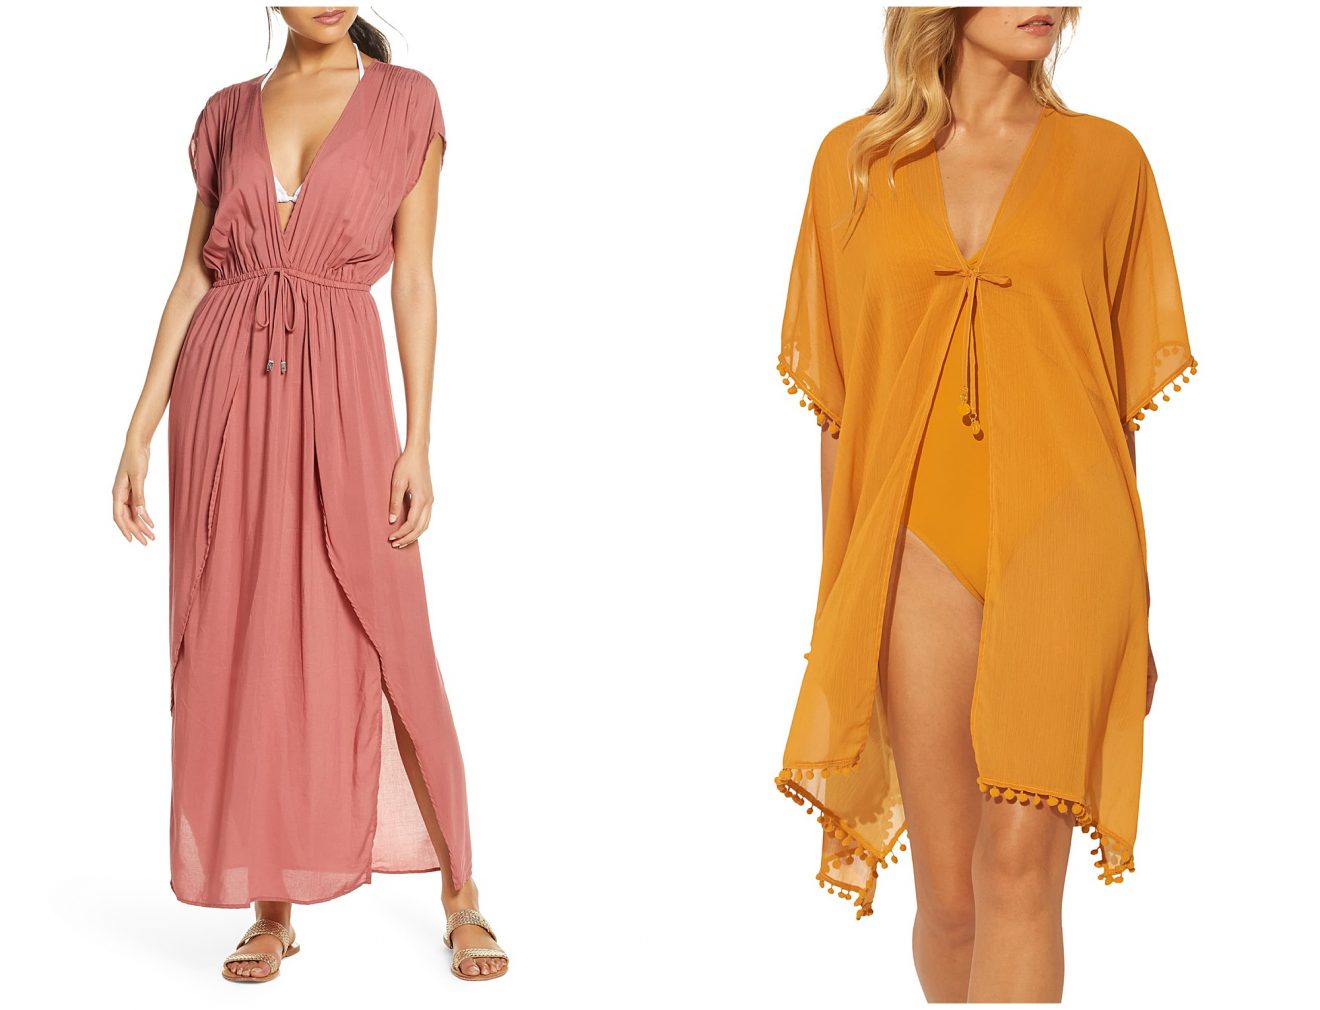 two swimsuit coverups from Nordstrom